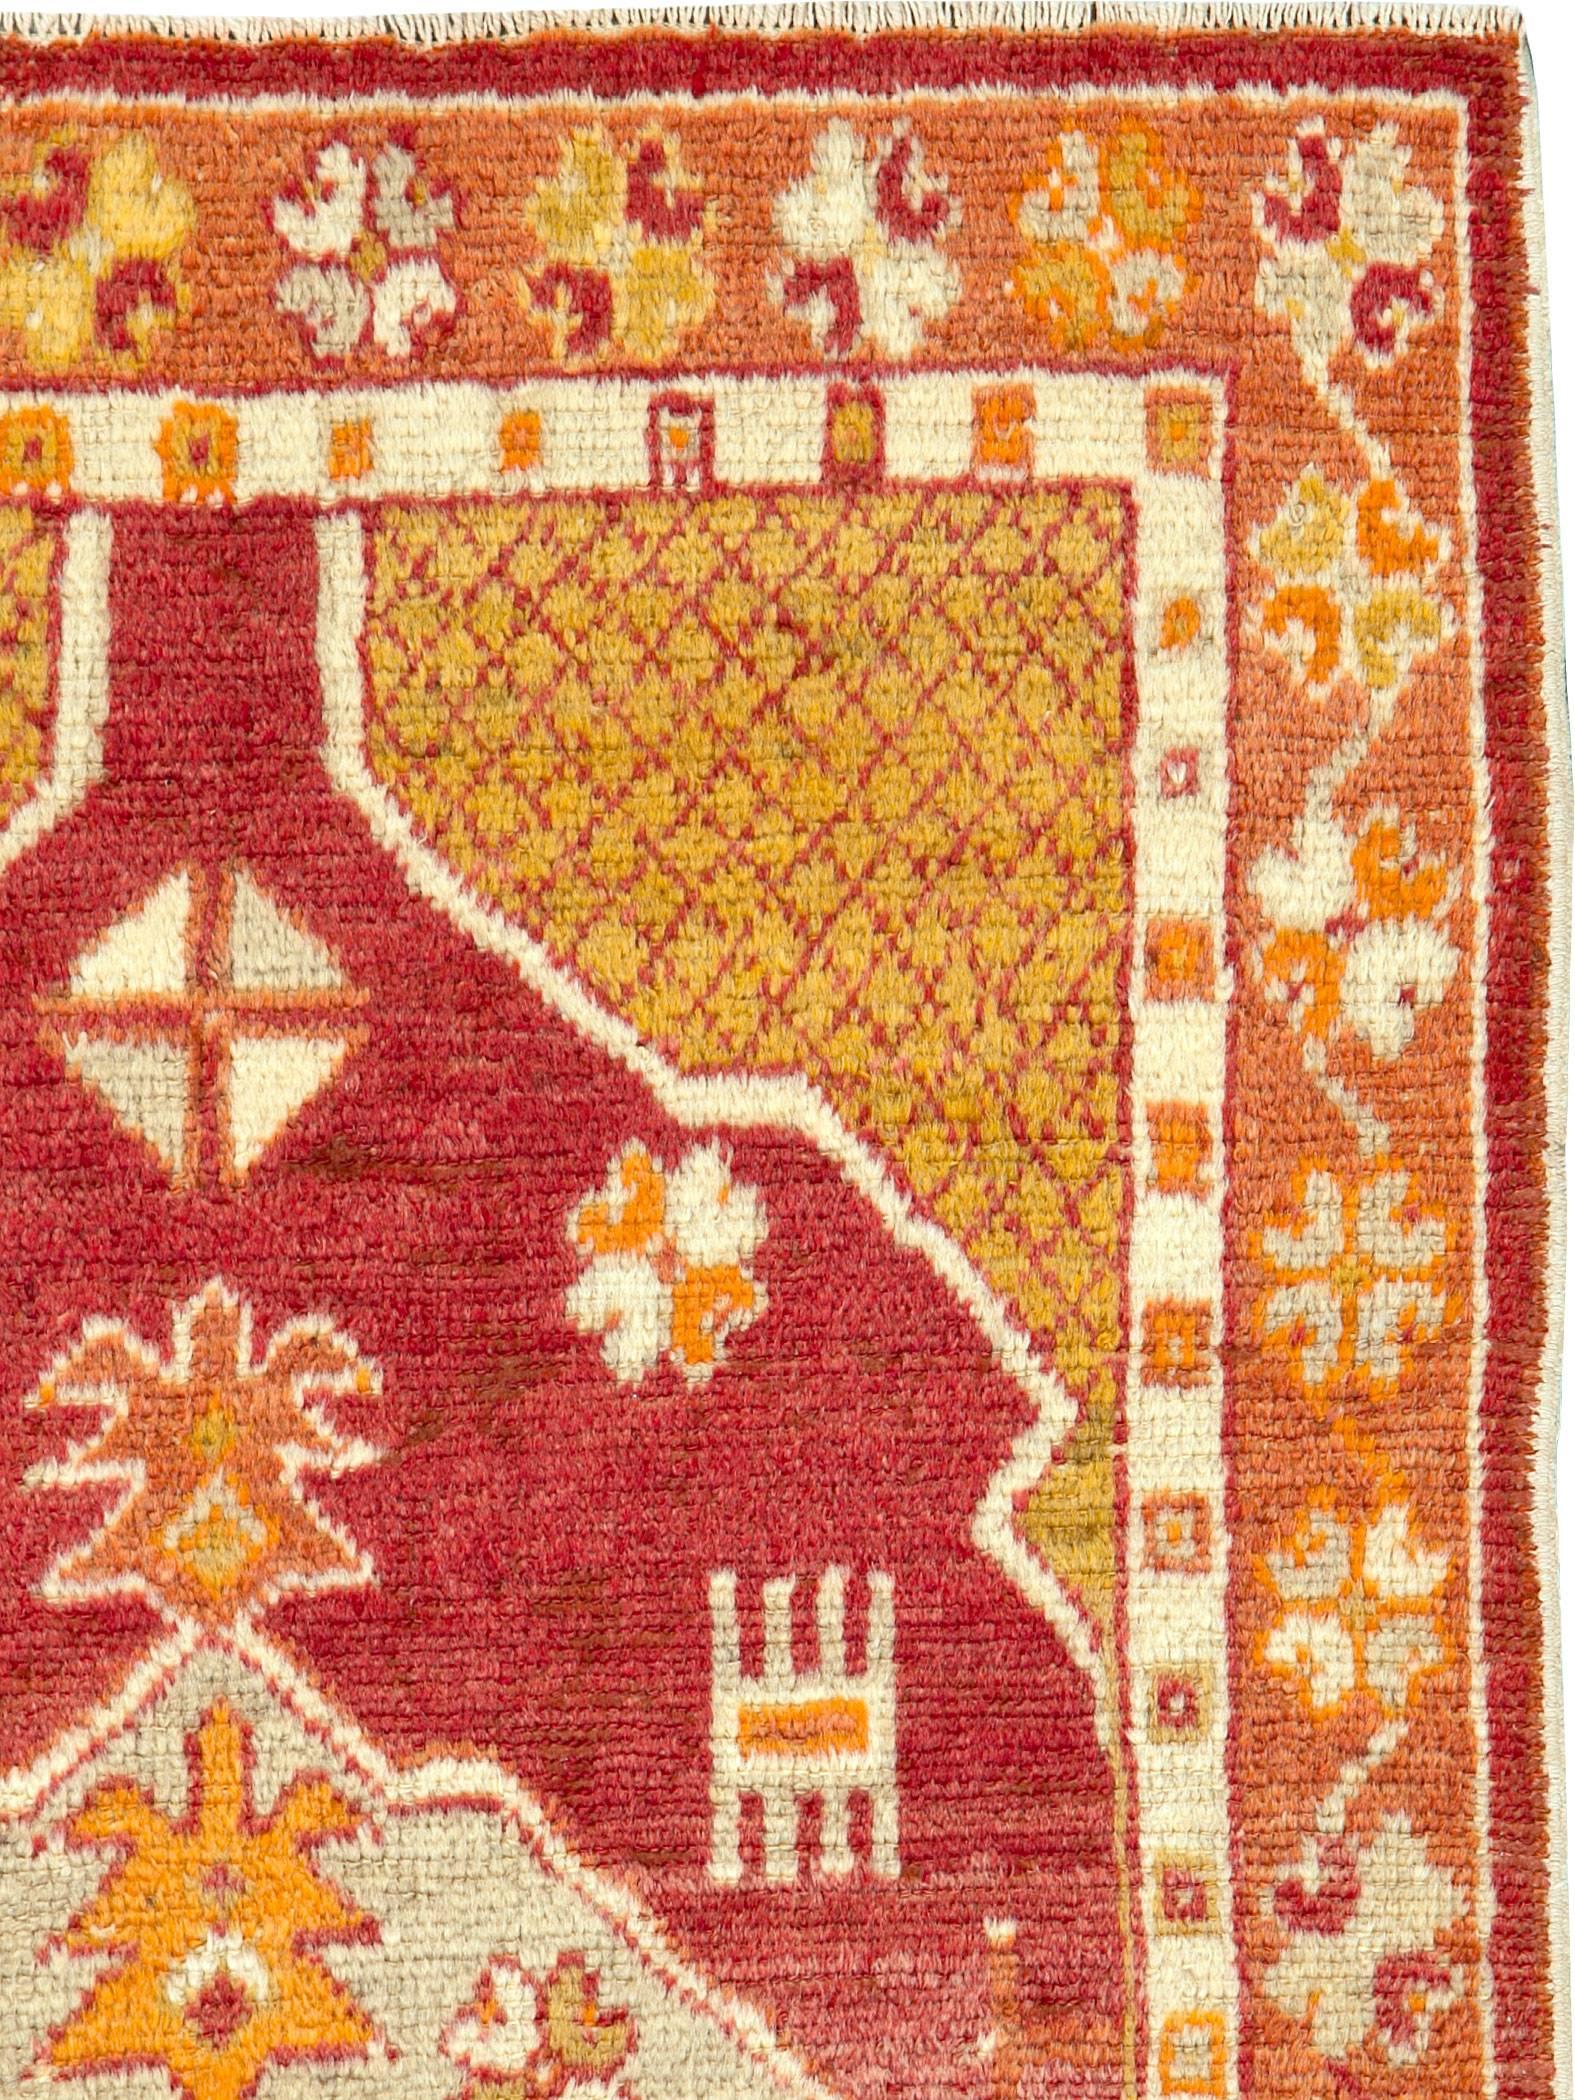 A vintage Turkish Oushak carpet from the second quarter of the 20th century.